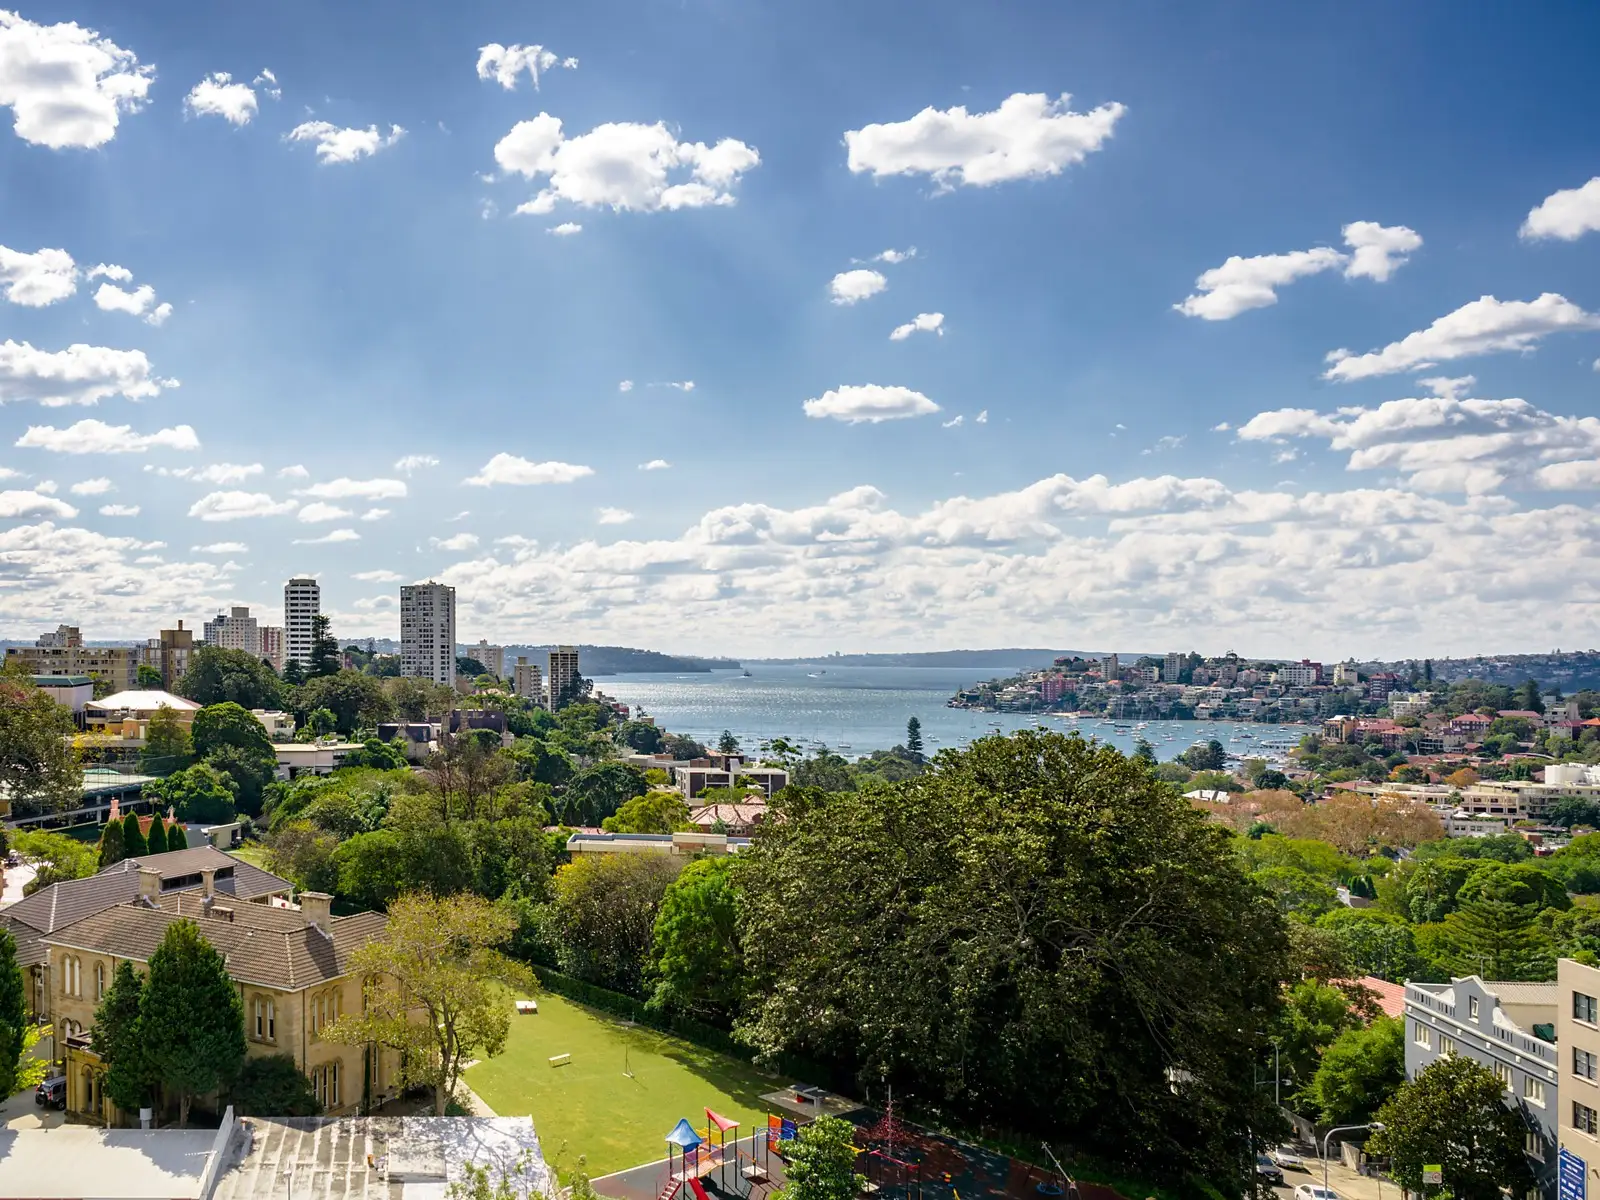 Photo #1: 1302/180 Ocean Street, Edgecliff - Sold by Sydney Sotheby's International Realty